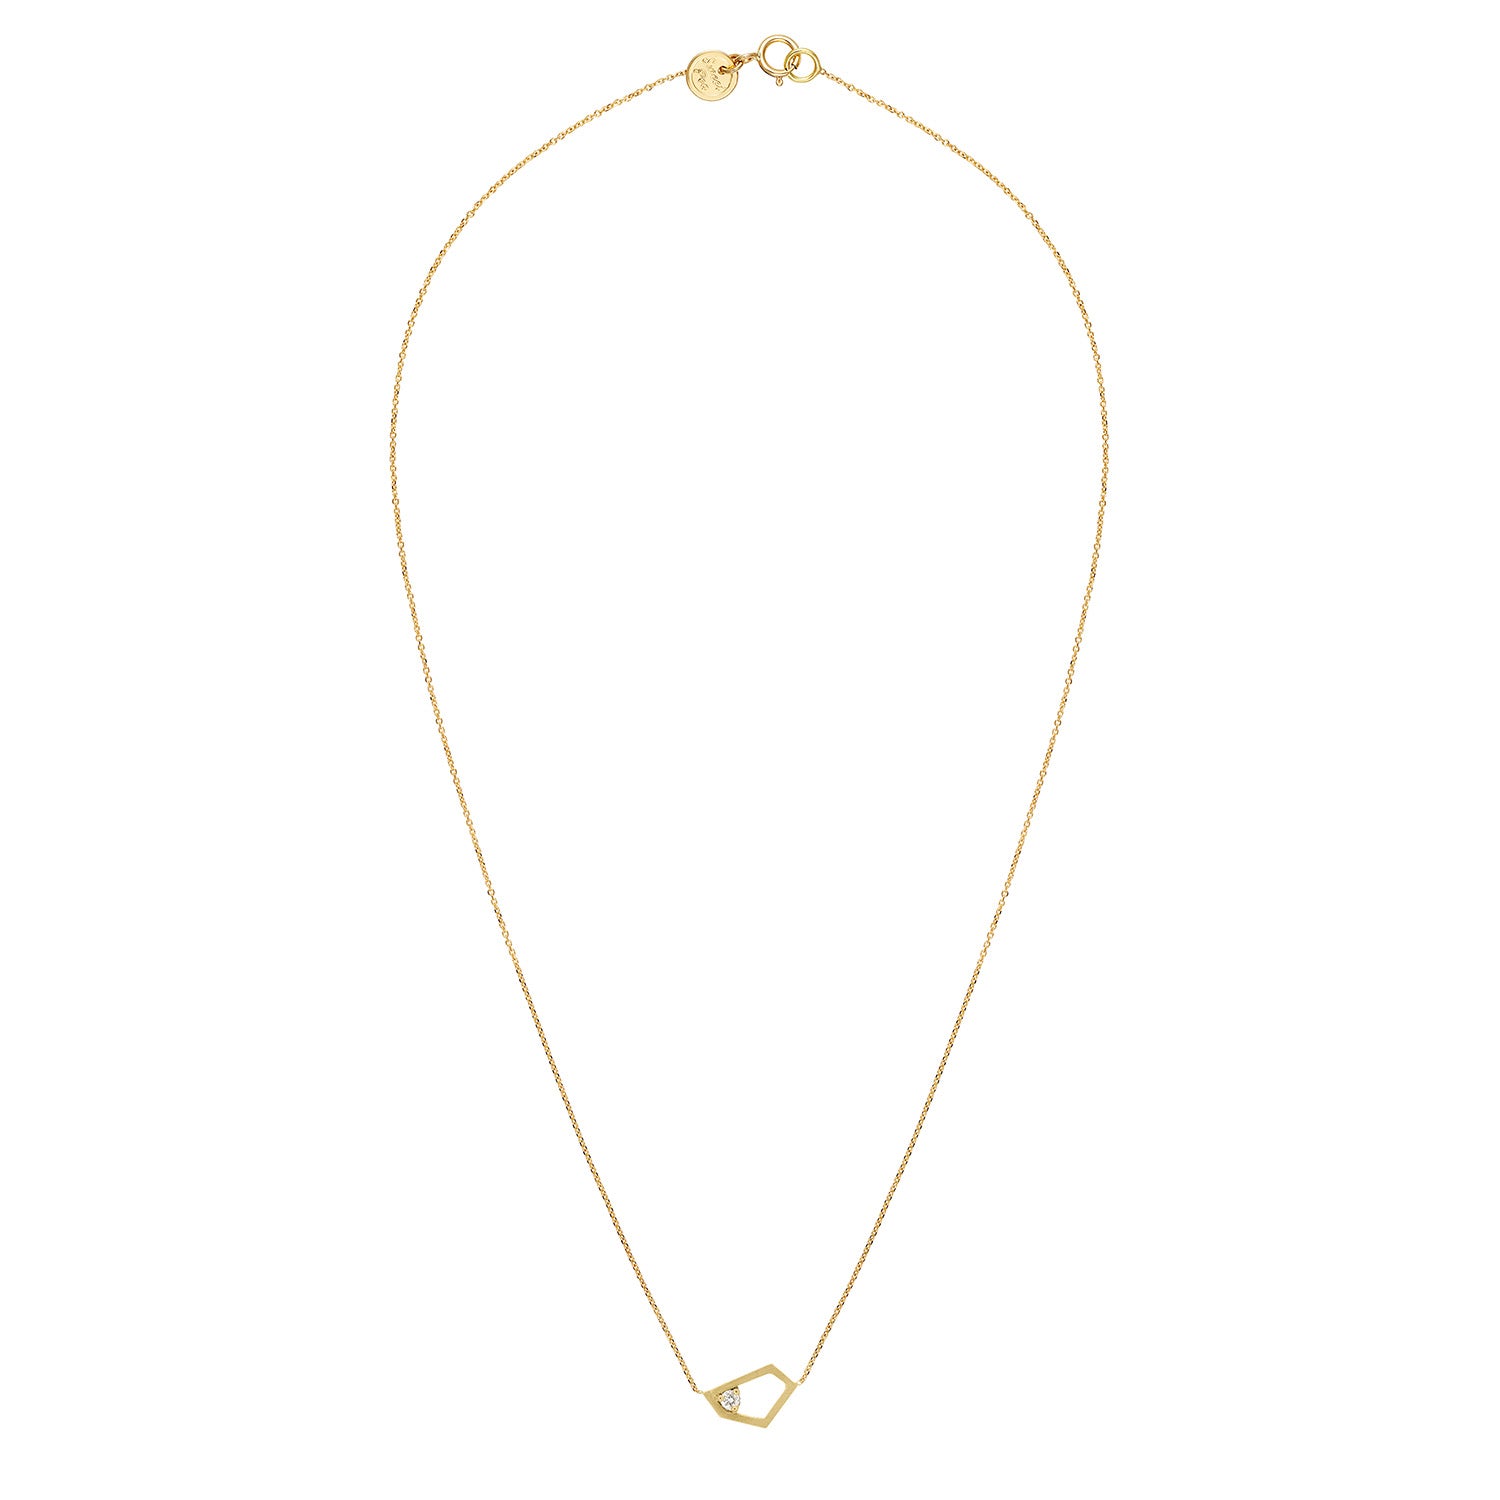 18ct yellow gold fine chain necklace with inserted open geometric shape in brushed finish and claw set white diamond